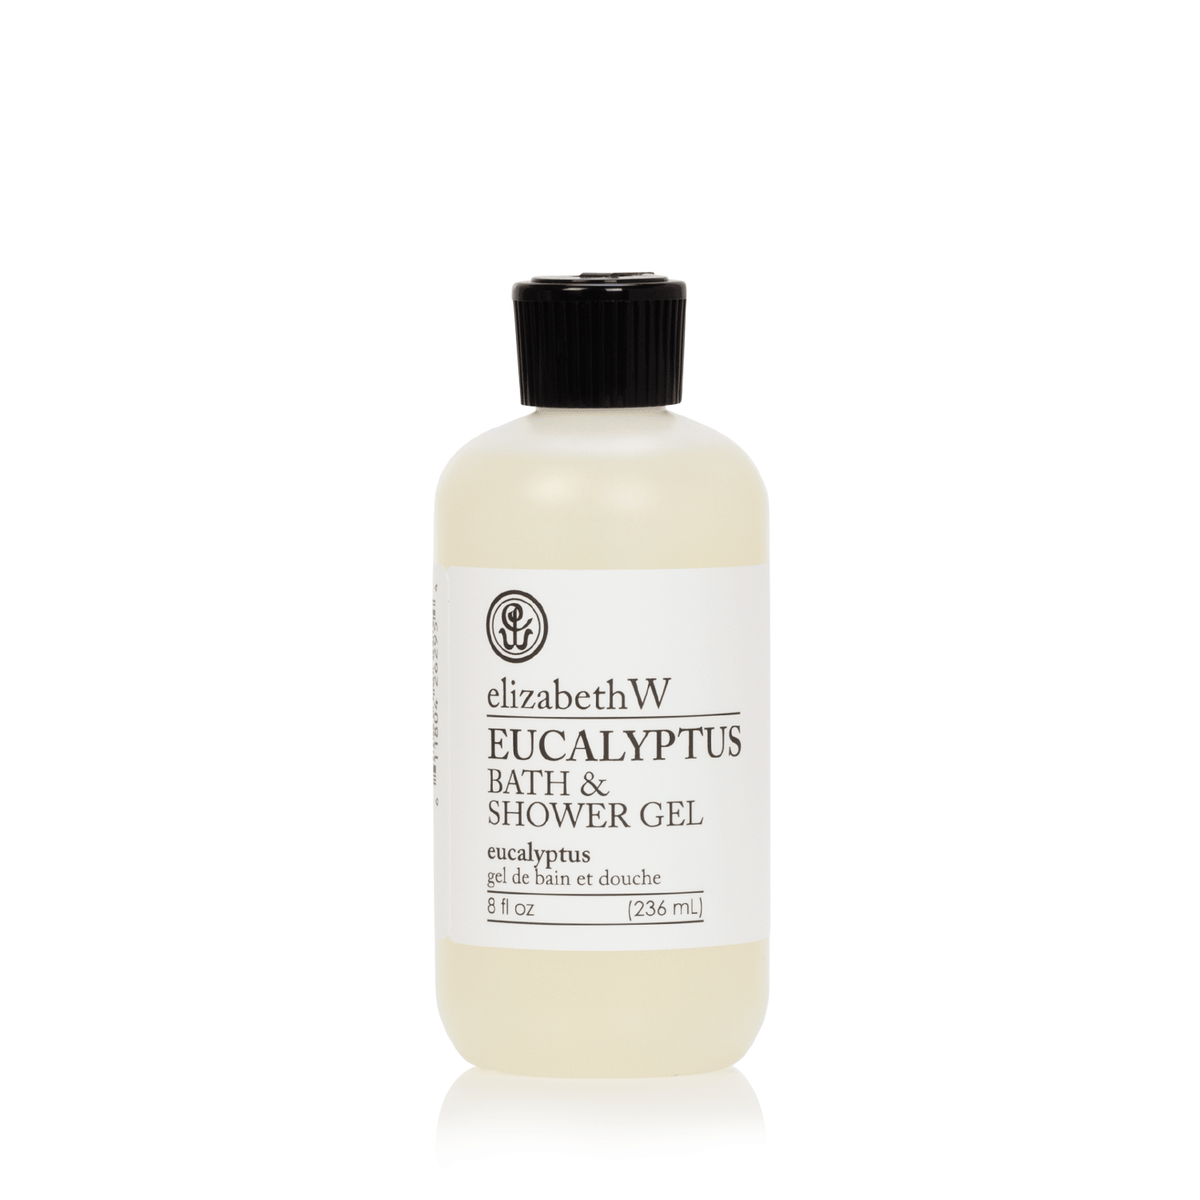 A bottle of elizabeth W Purely Essential Eucalyptus Bath & Shower Gel with a black cap, labeled clearly in black and green text against a white background.